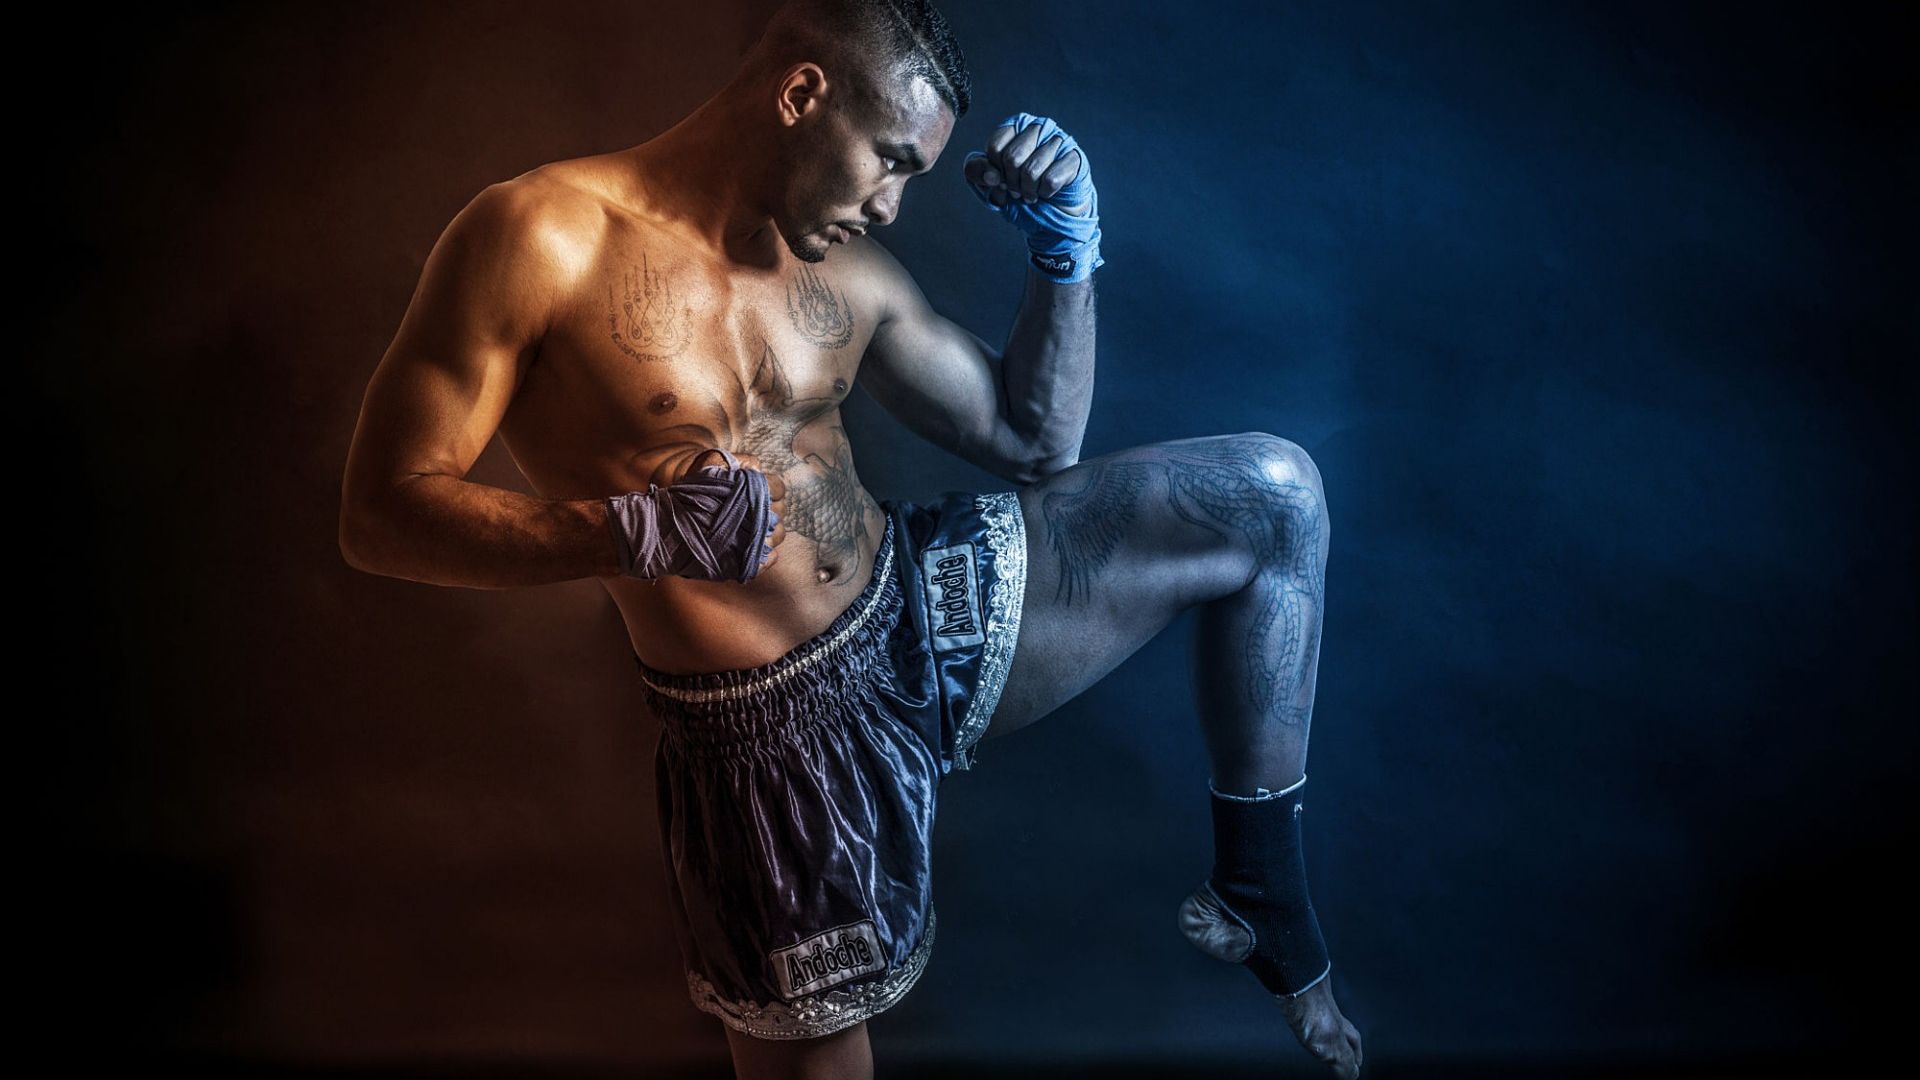 Wallpaper boxing gloves abs images for desktop section спорт  download